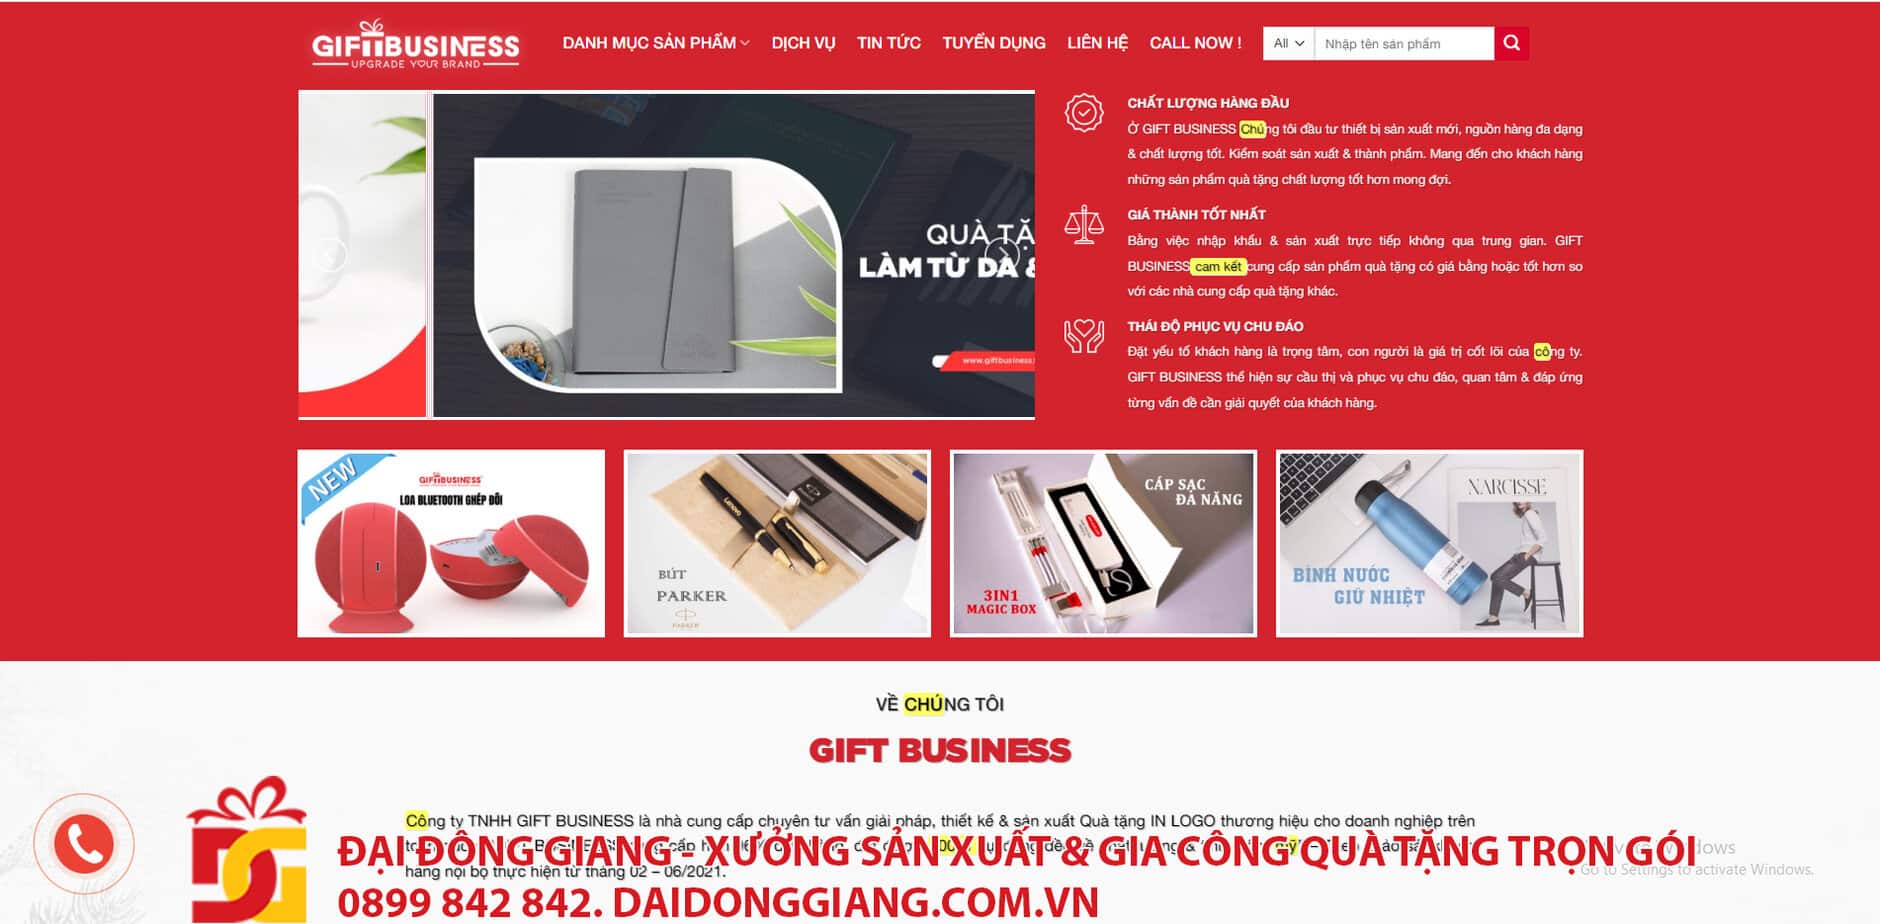 Gift business